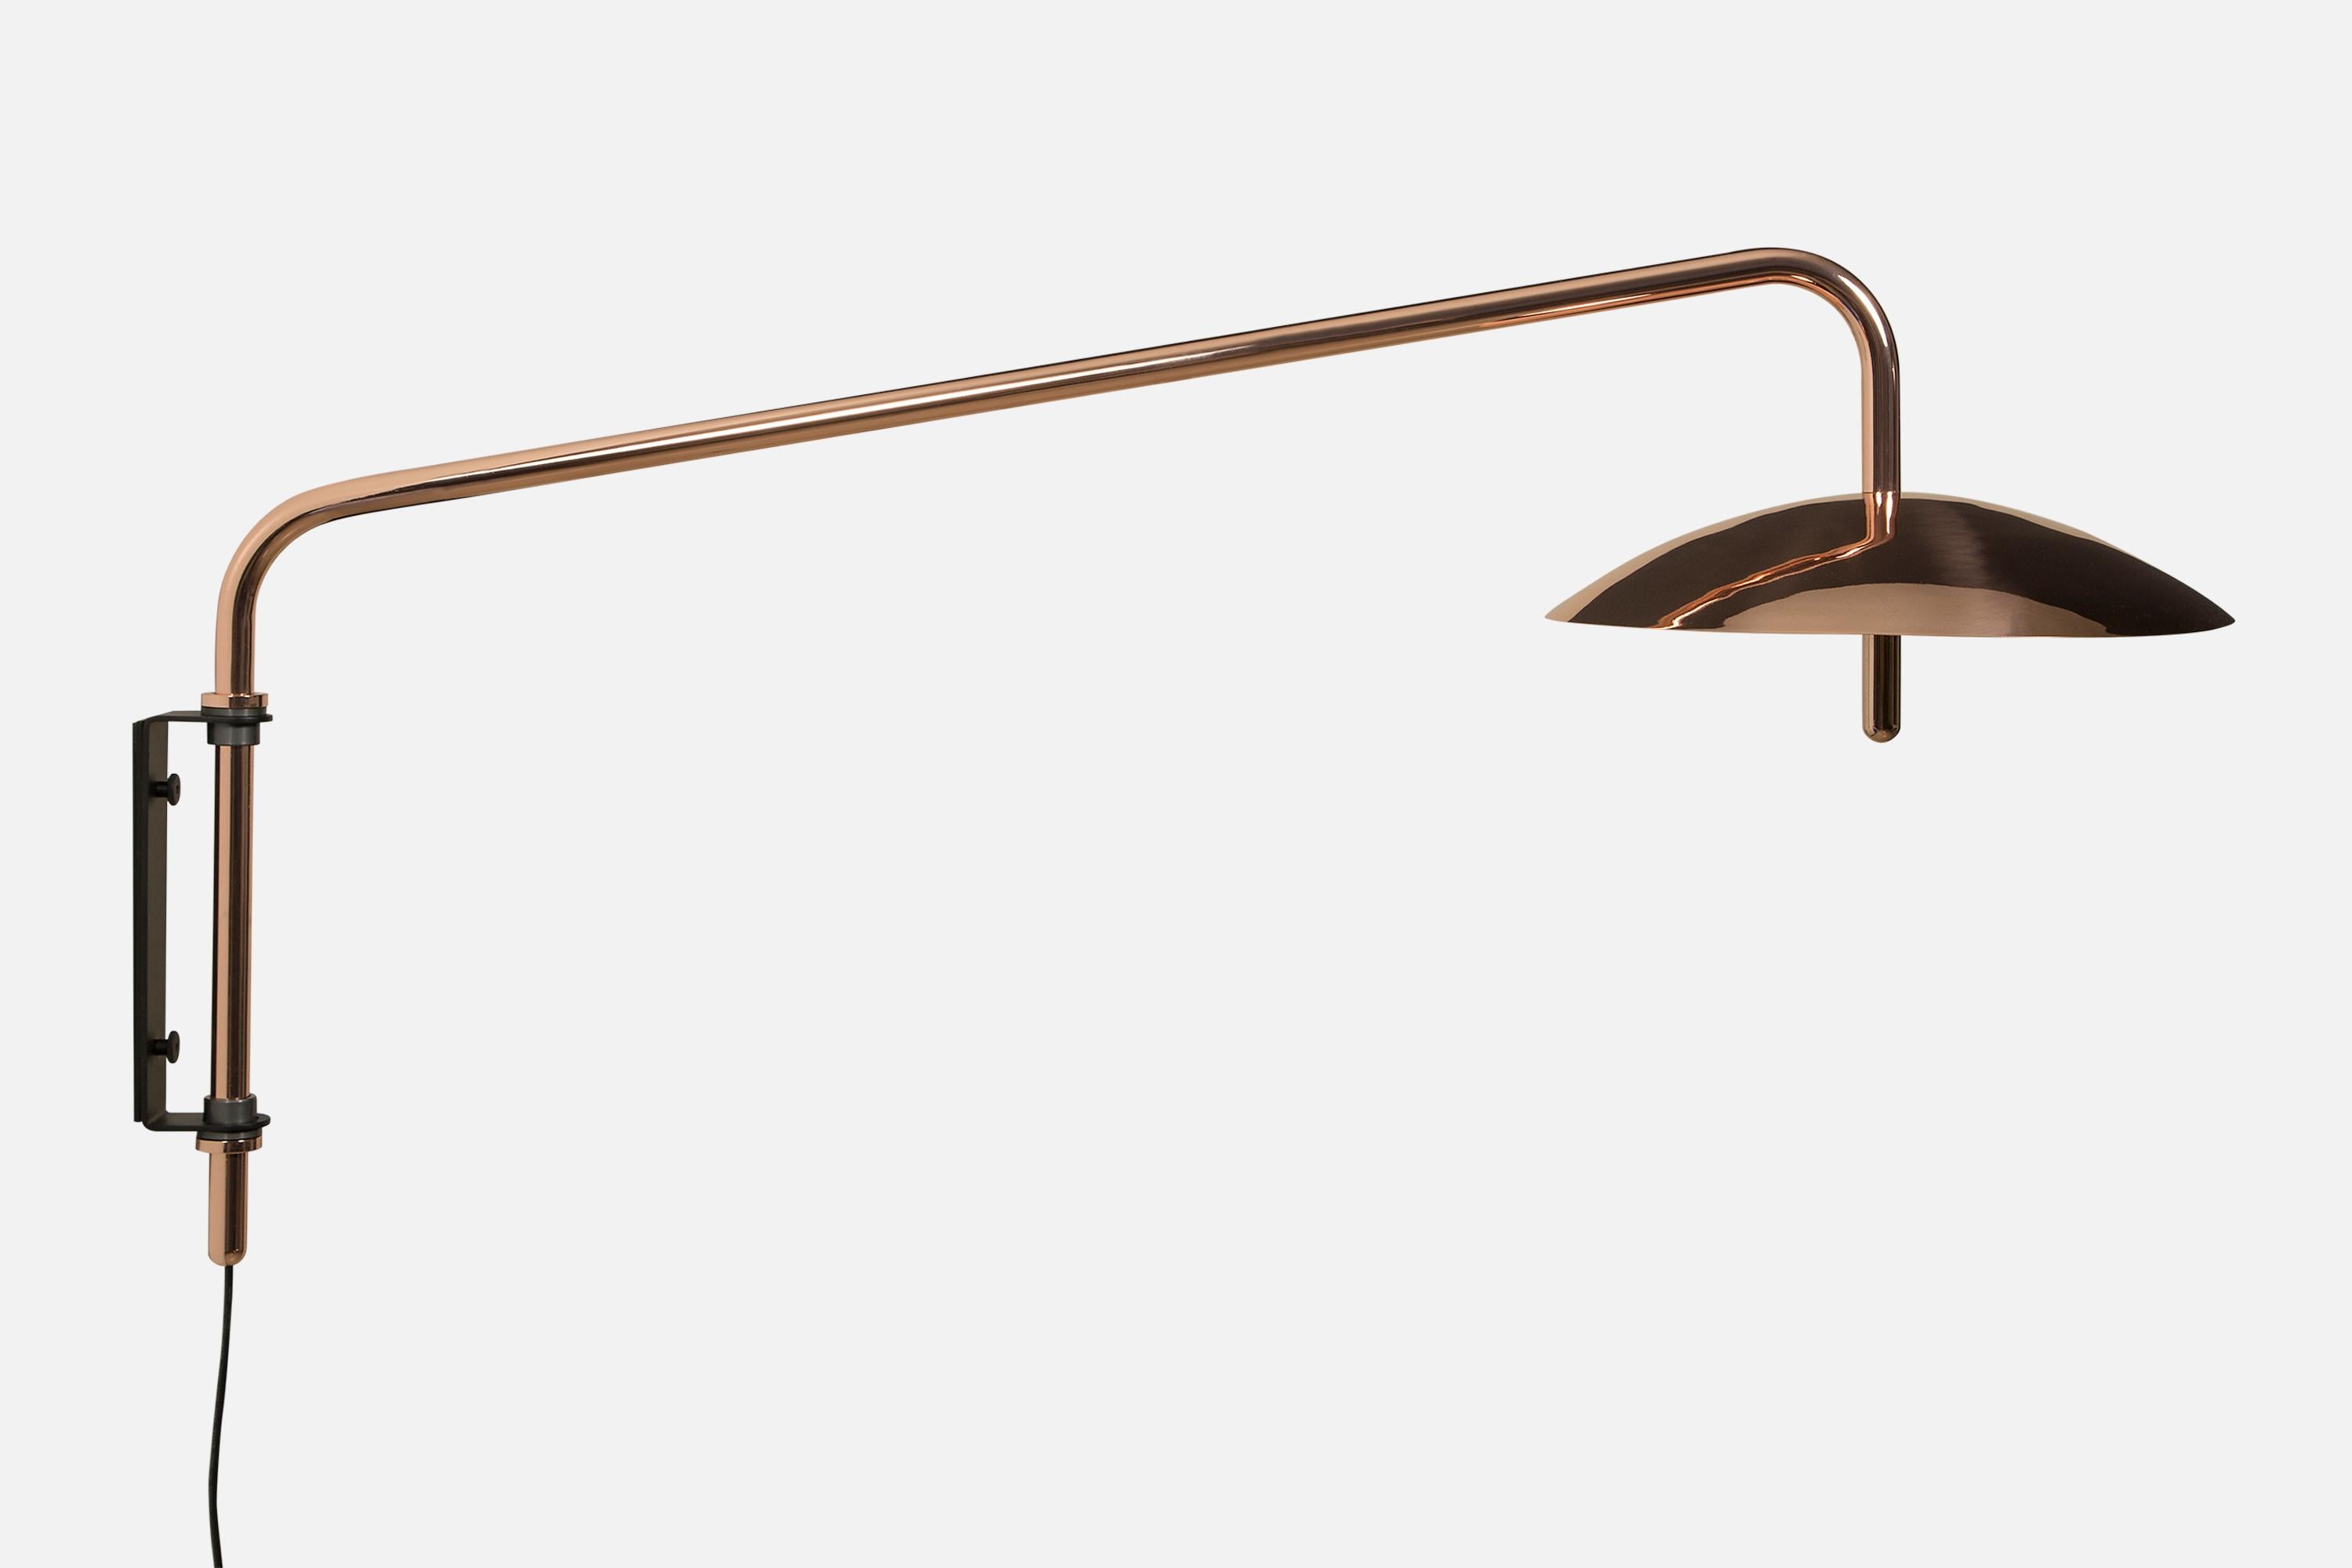 Contemporary Signal Arm Sconce in White X Copper, Long, by Souda, in Stock